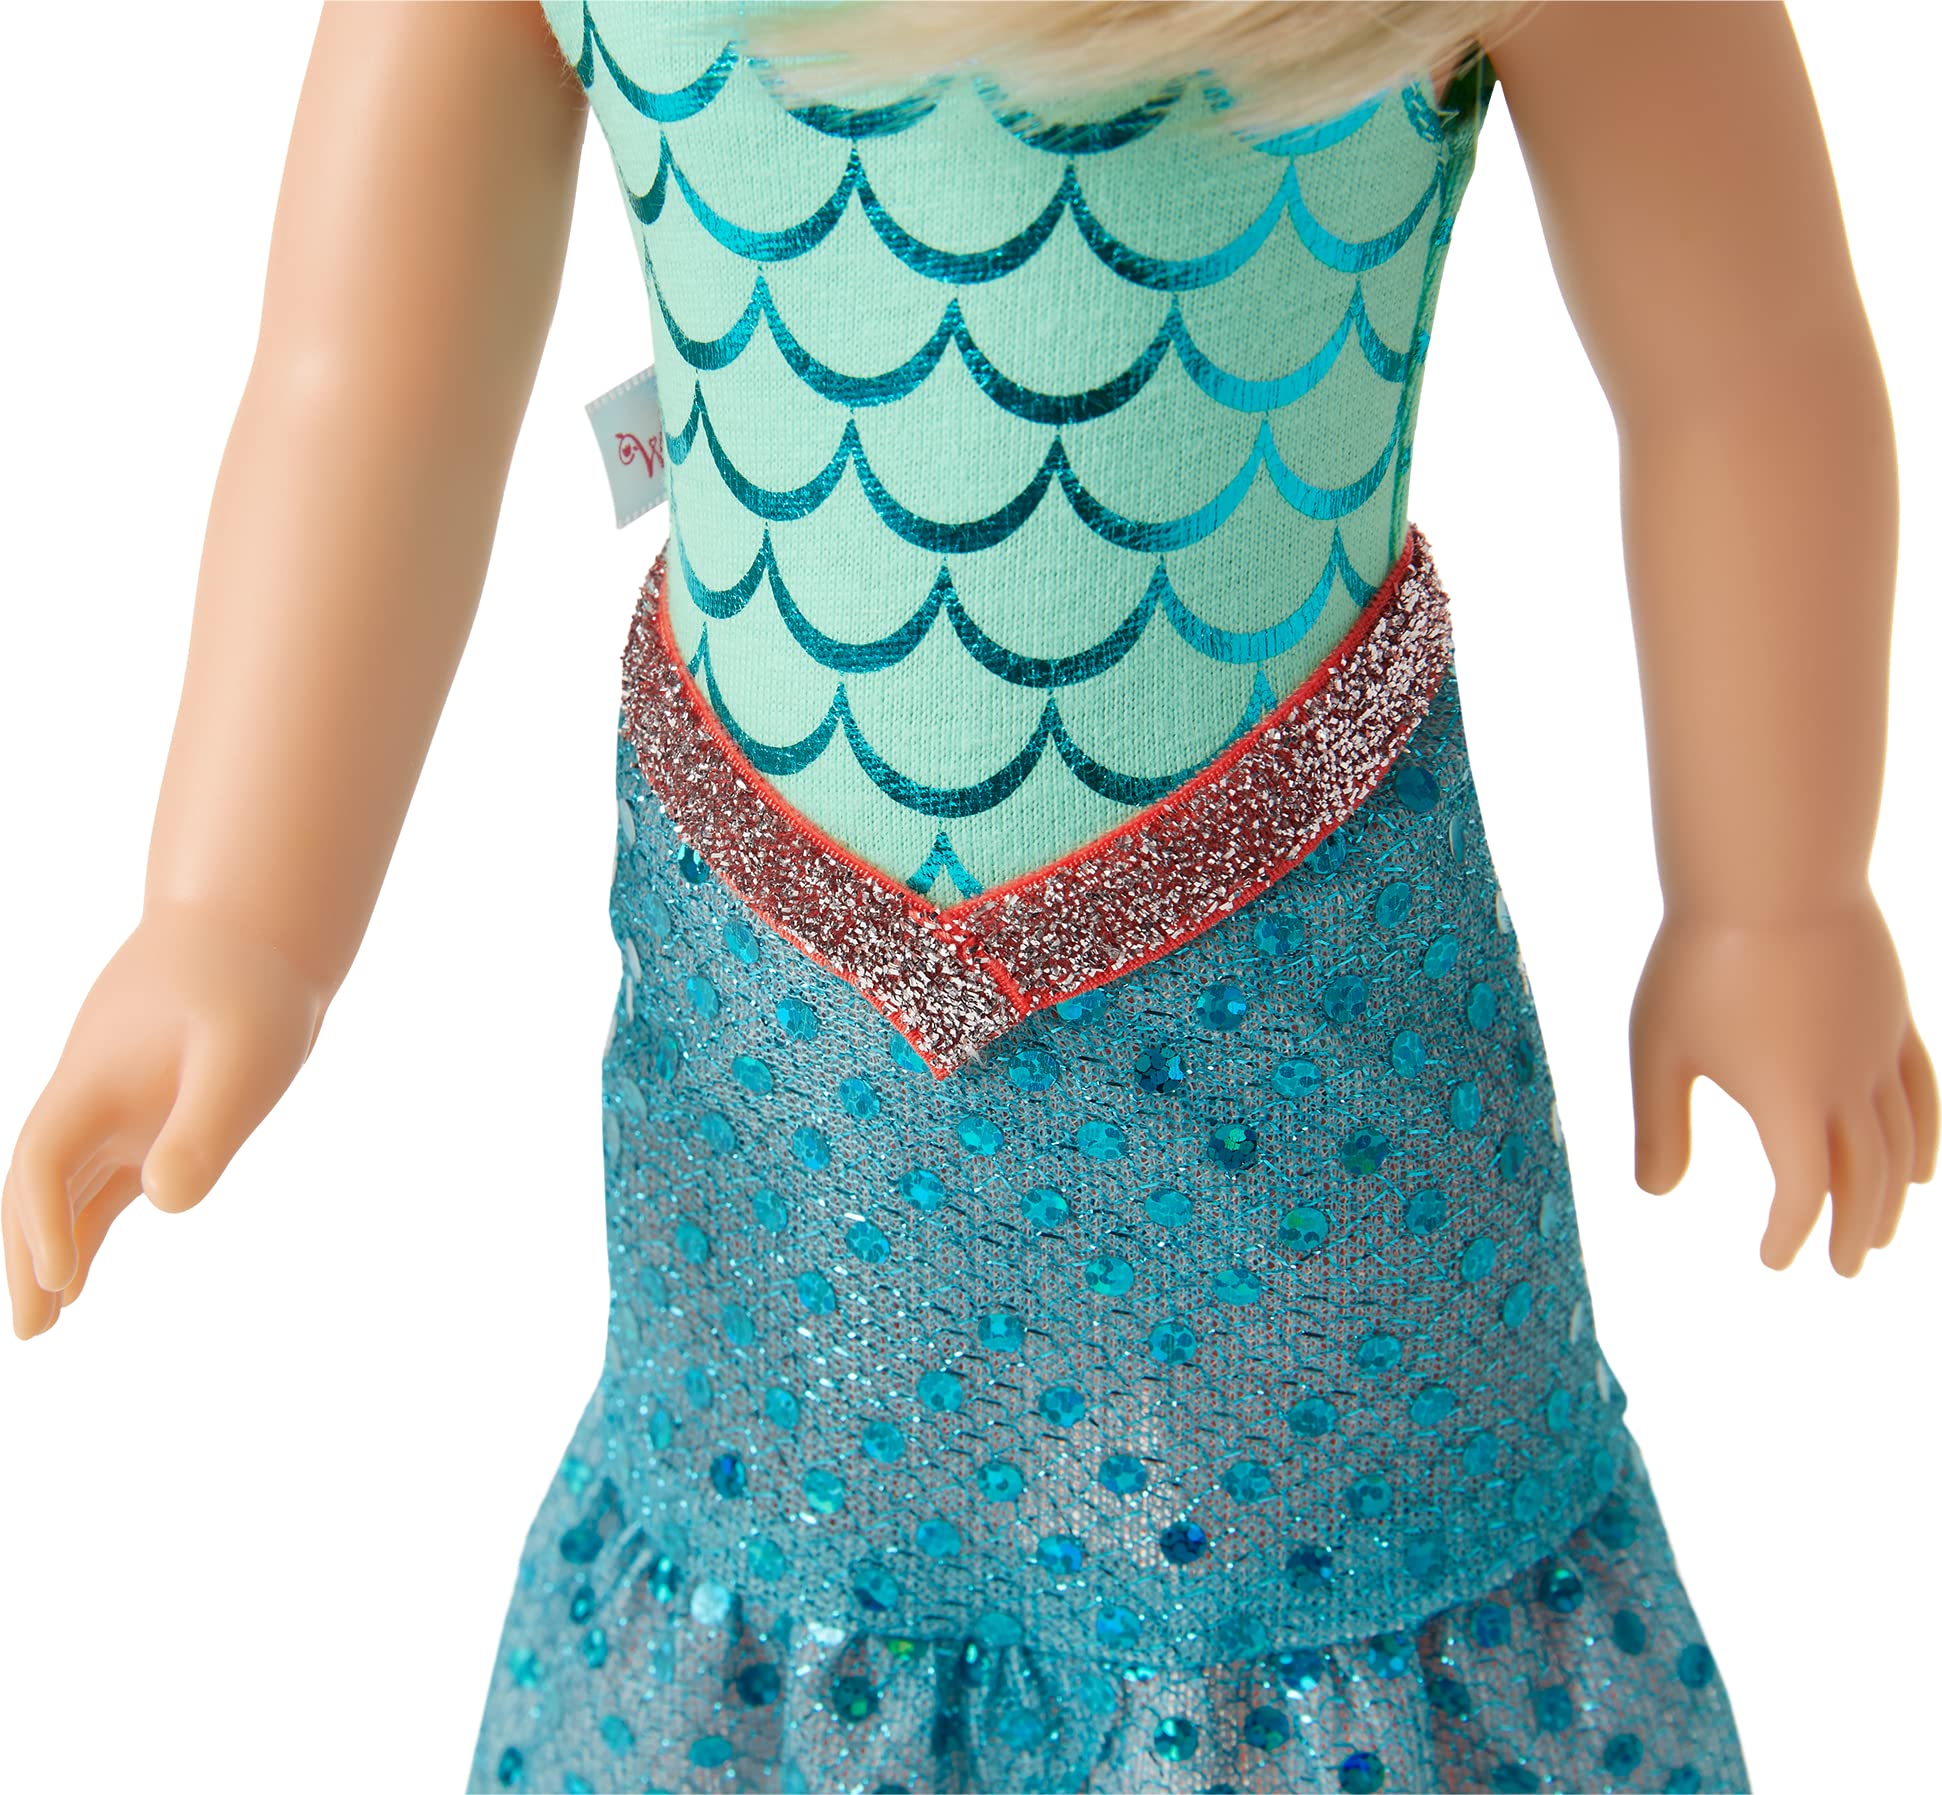 American Girl WellieWishers Camille 14.5-inch Doll with Blue Eyes, Blond Hair, Blue Mermaid Print Leotard, Sea-Blue Skirt, Ages 4+